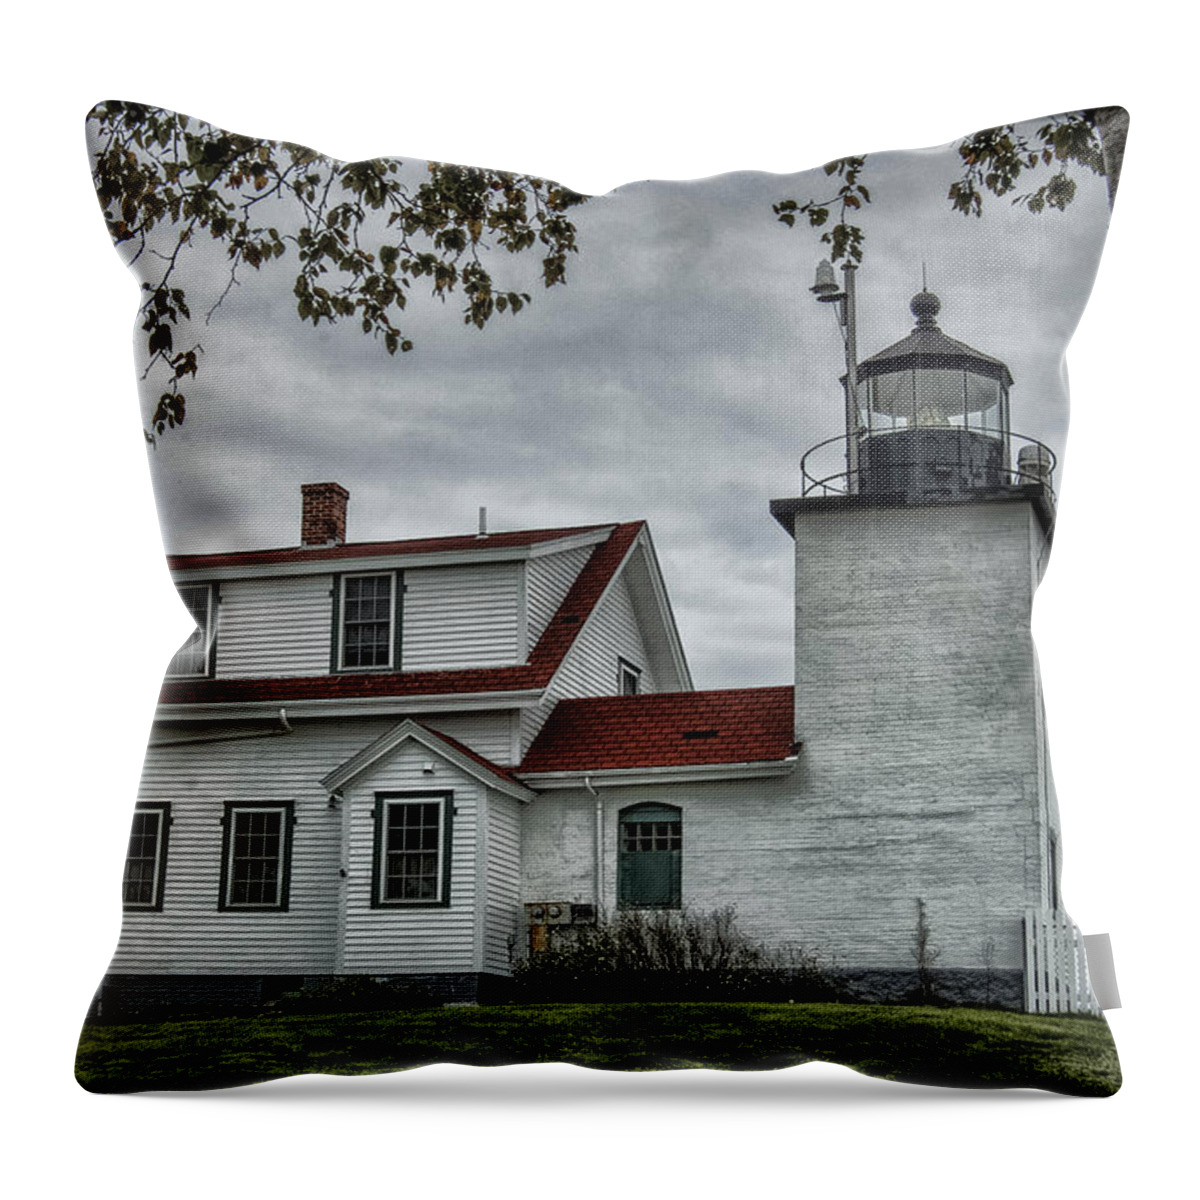 Lighthouse Throw Pillow featuring the photograph Fort Point Lighthouse by Erika Fawcett